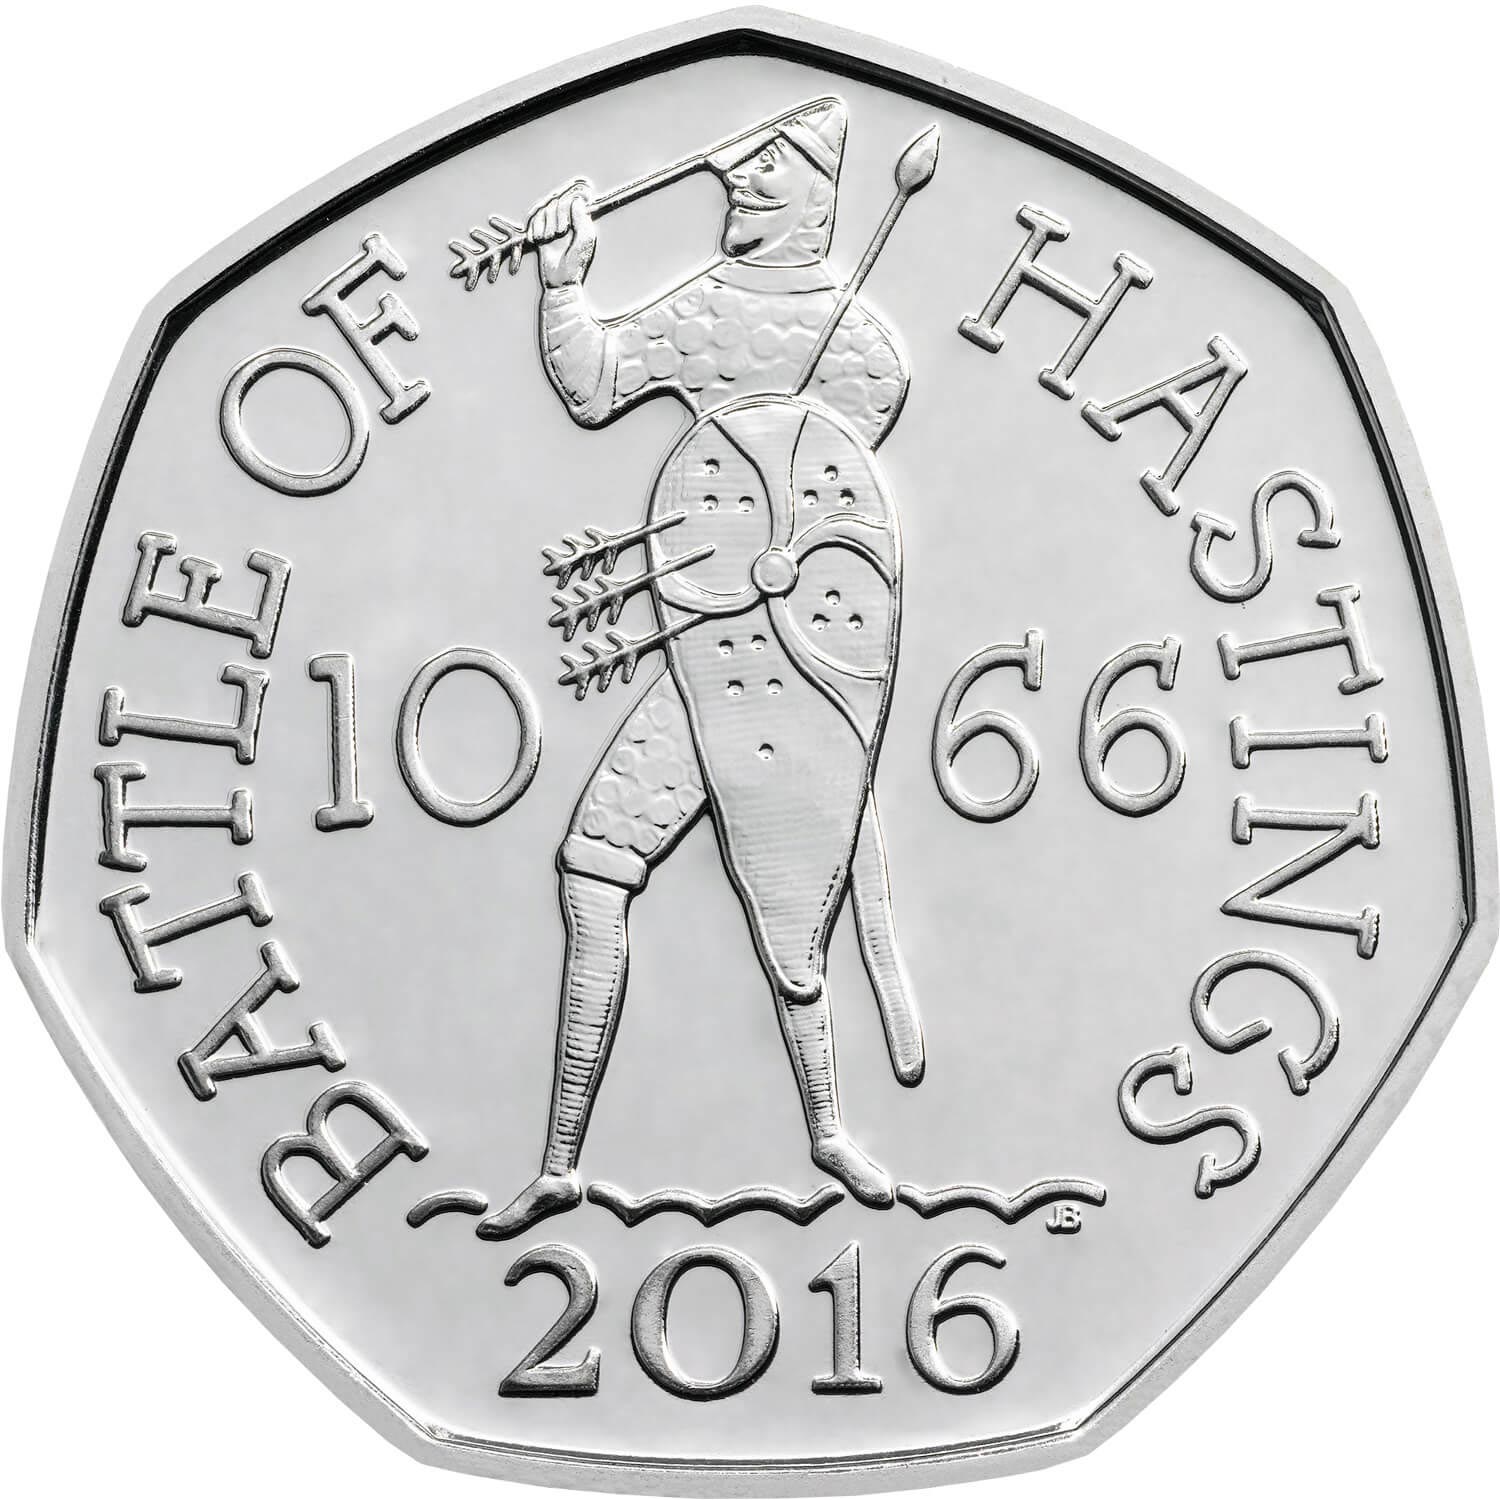 Image of 50 pence coin - Battle of Hastings  | United Kingdom 2016.  The Copper–Nickel (CuNi) coin is of UNC quality.